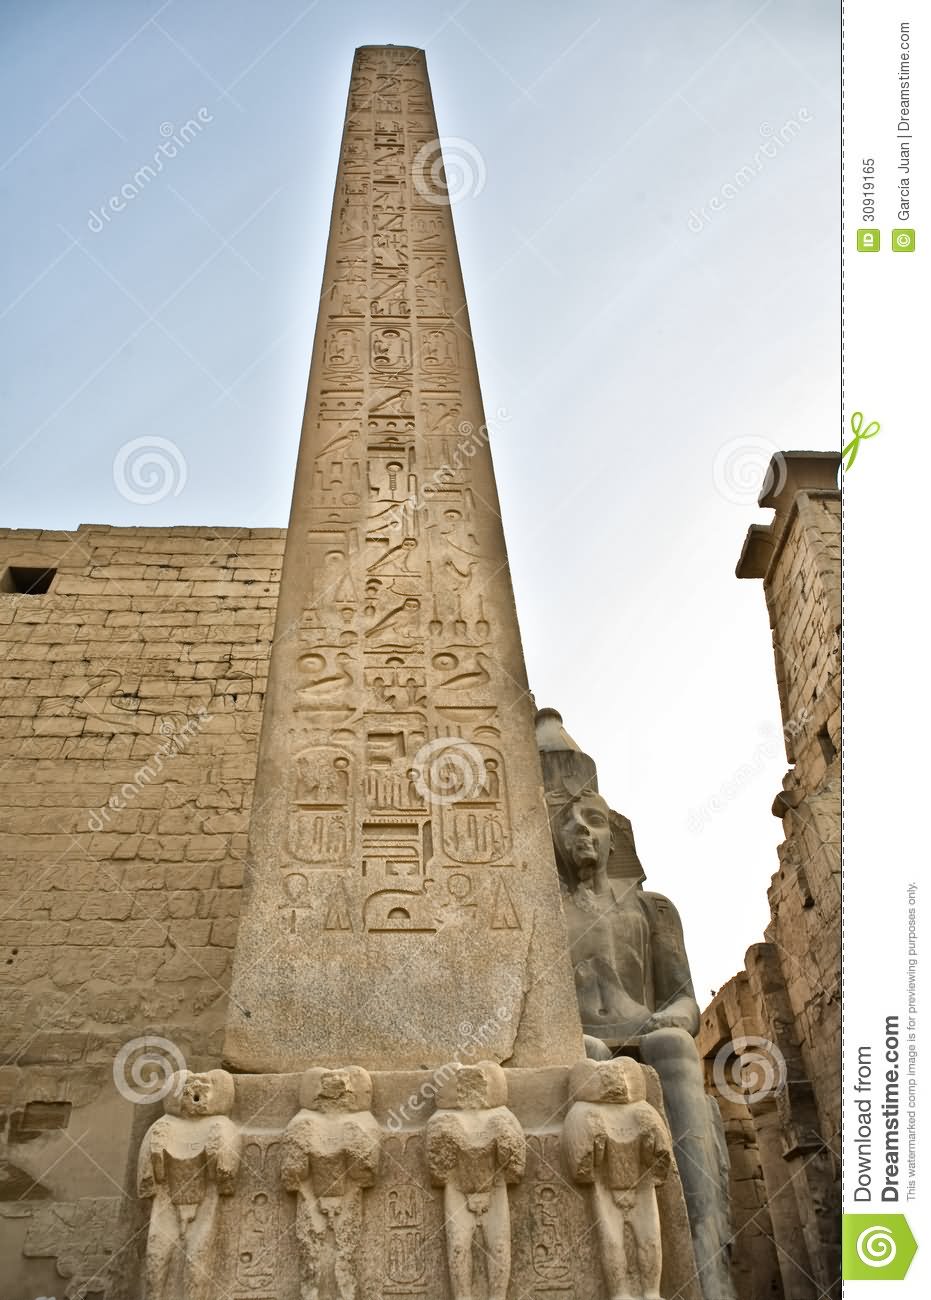 Obelisk At The Entrance Of The Luxor Temple, Egypt